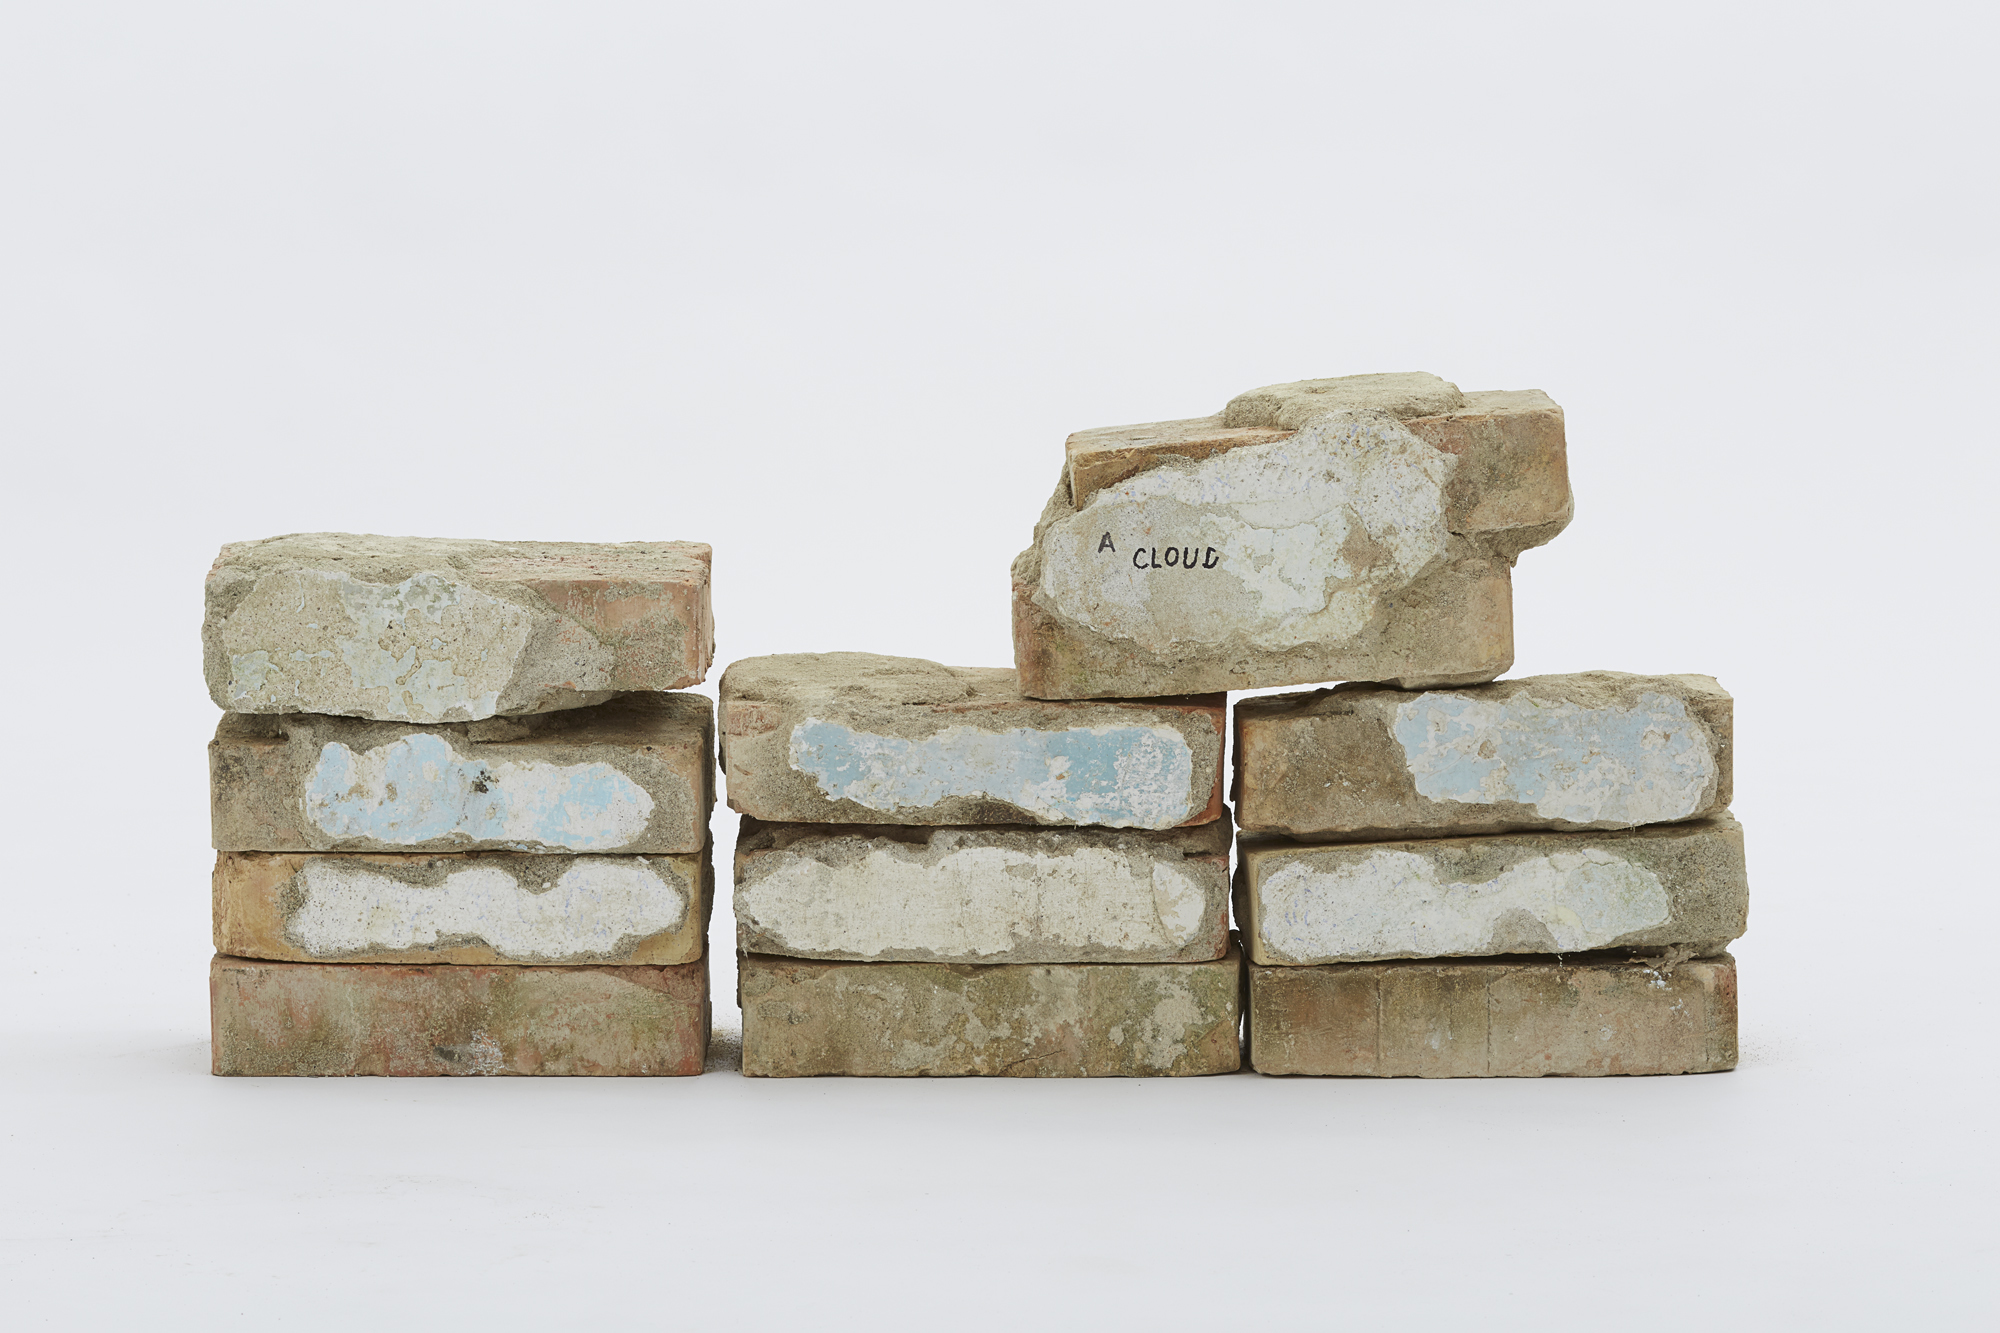 Jimmie Durham, These Twelf Bricks Were Used to Represent the Dawn Sky in Venice, 2015